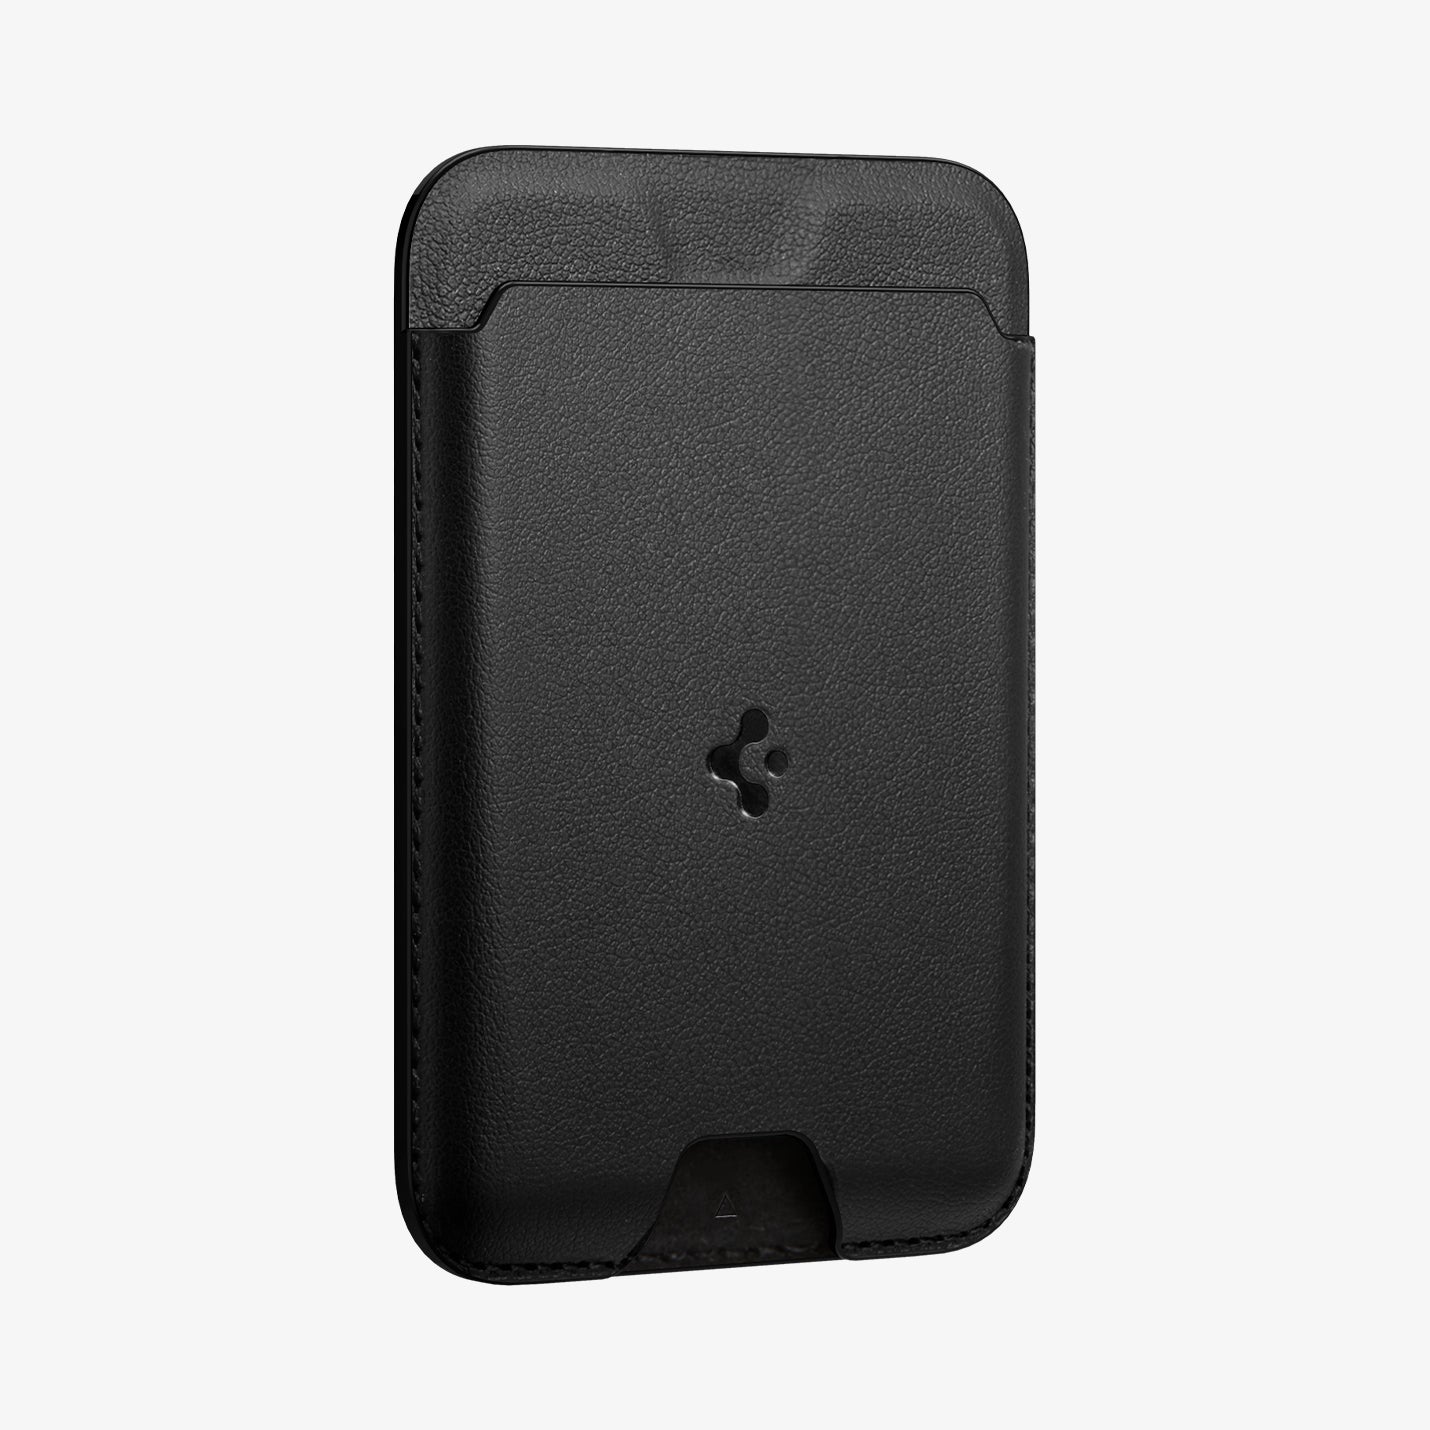 AFA05760 - MagSafe 3 Cards Holder Valentinus (MagFit) in black showing the front and side